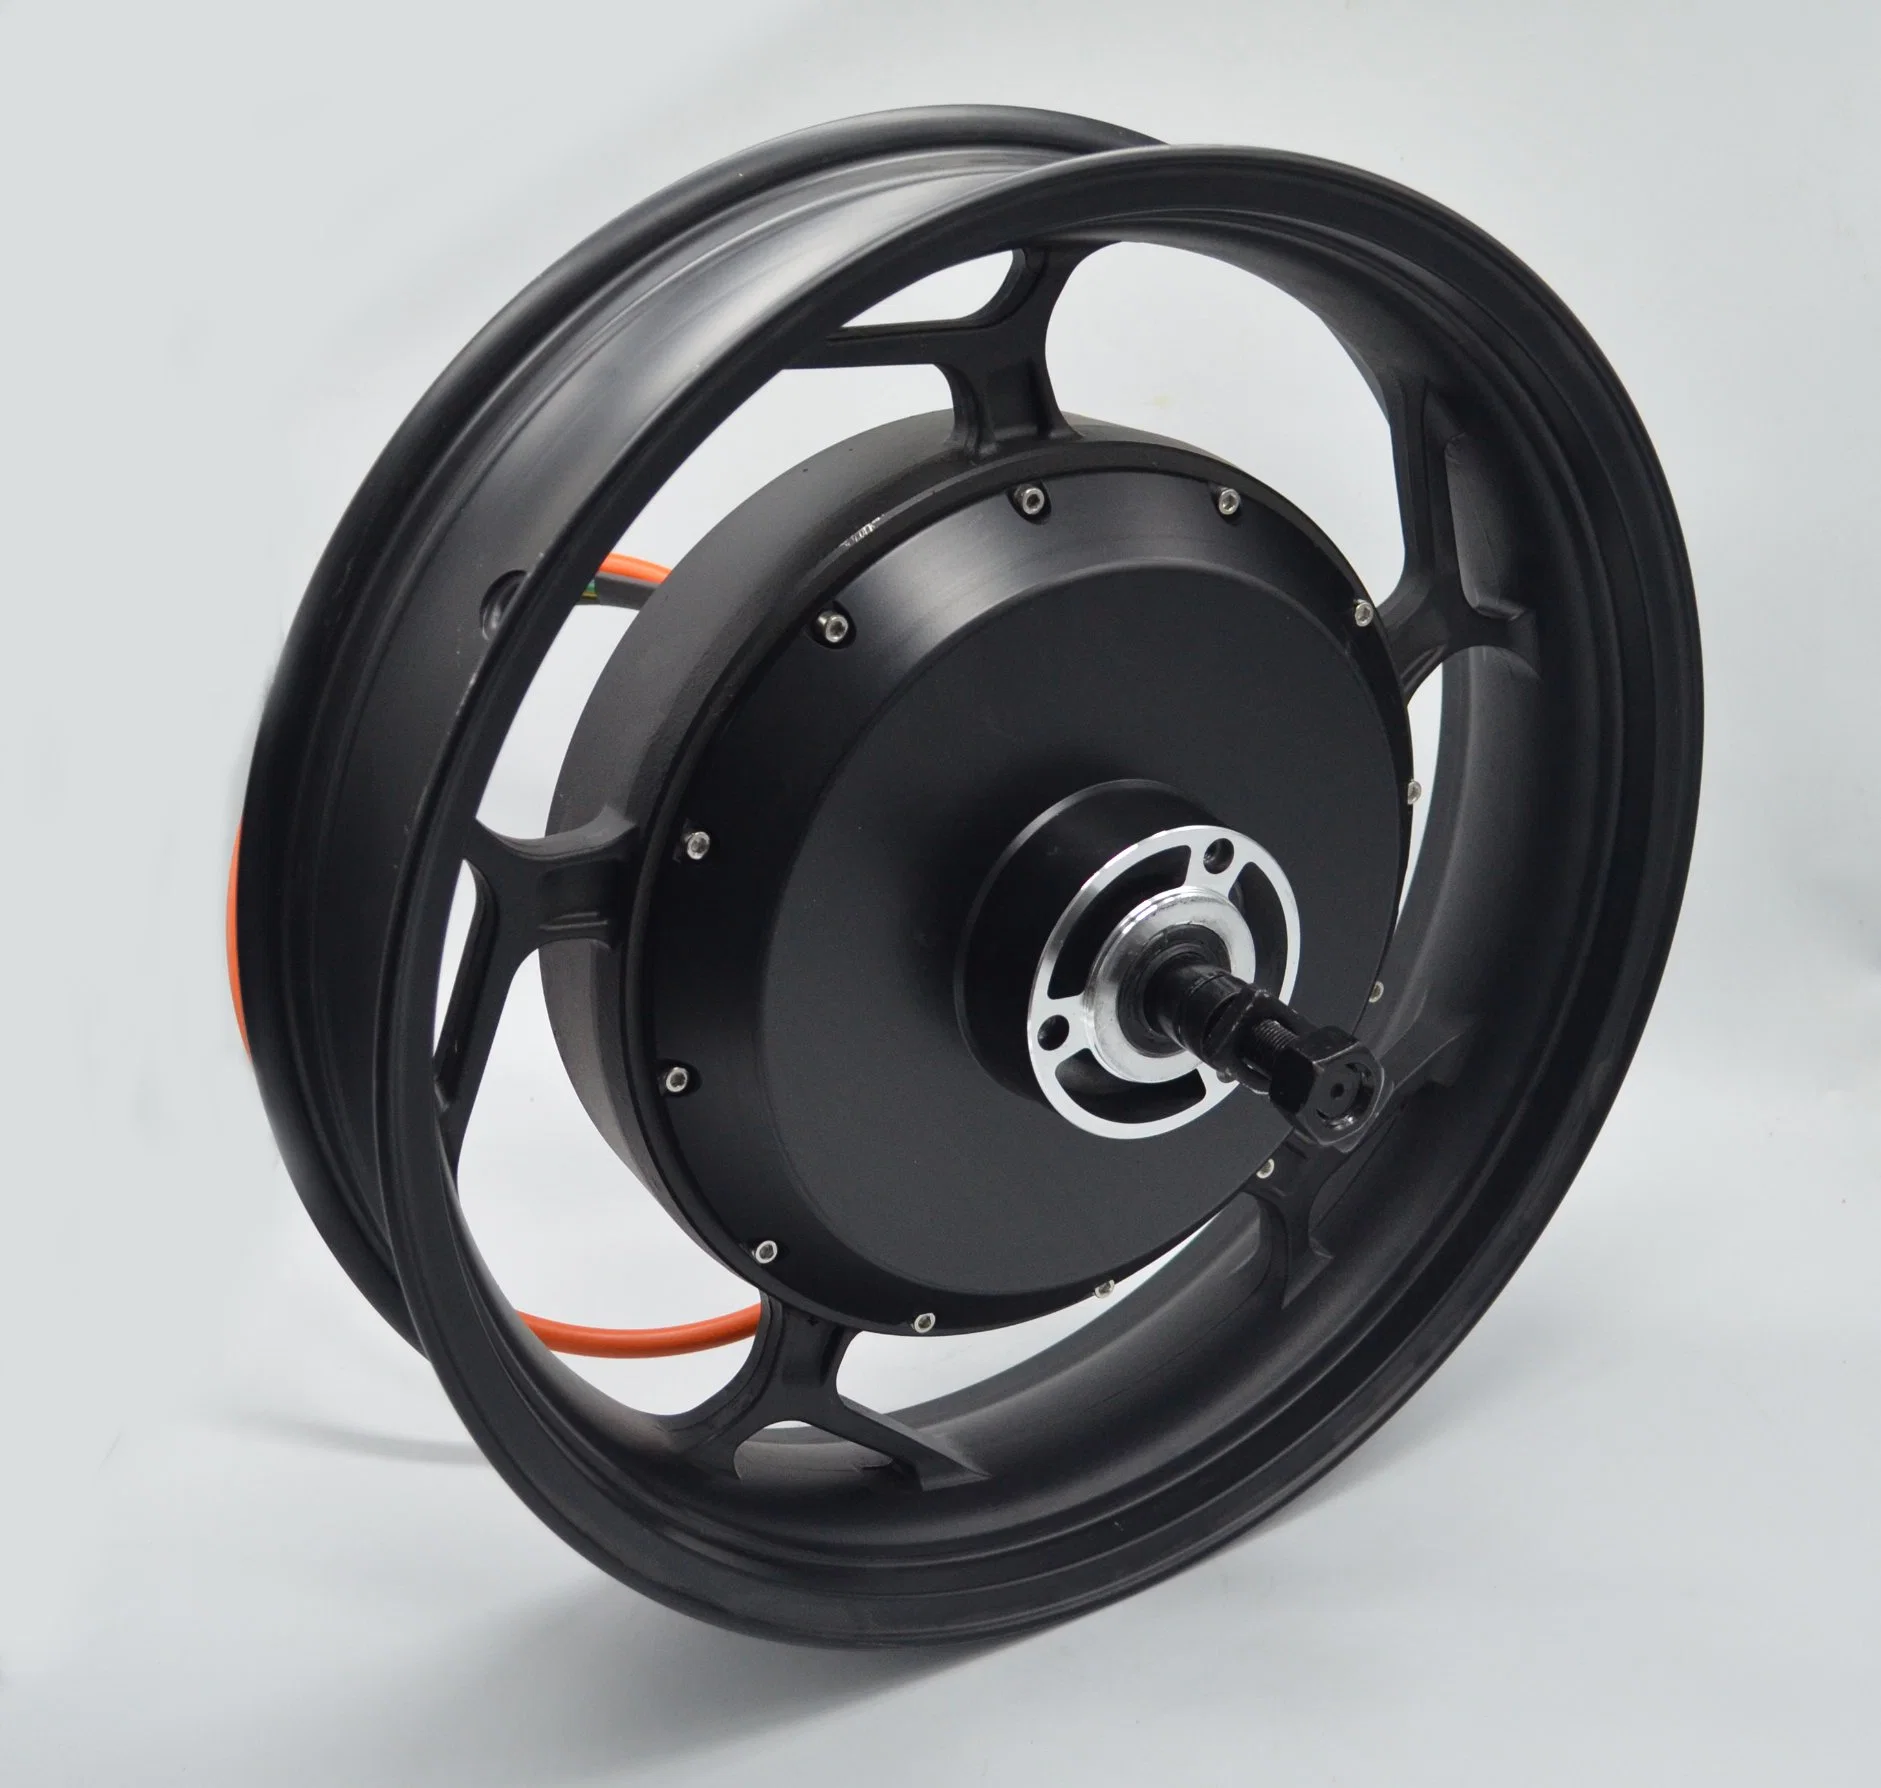 17" 1500W, 2000W, 3000W High Power Electric Motor for Electric Motorcycle